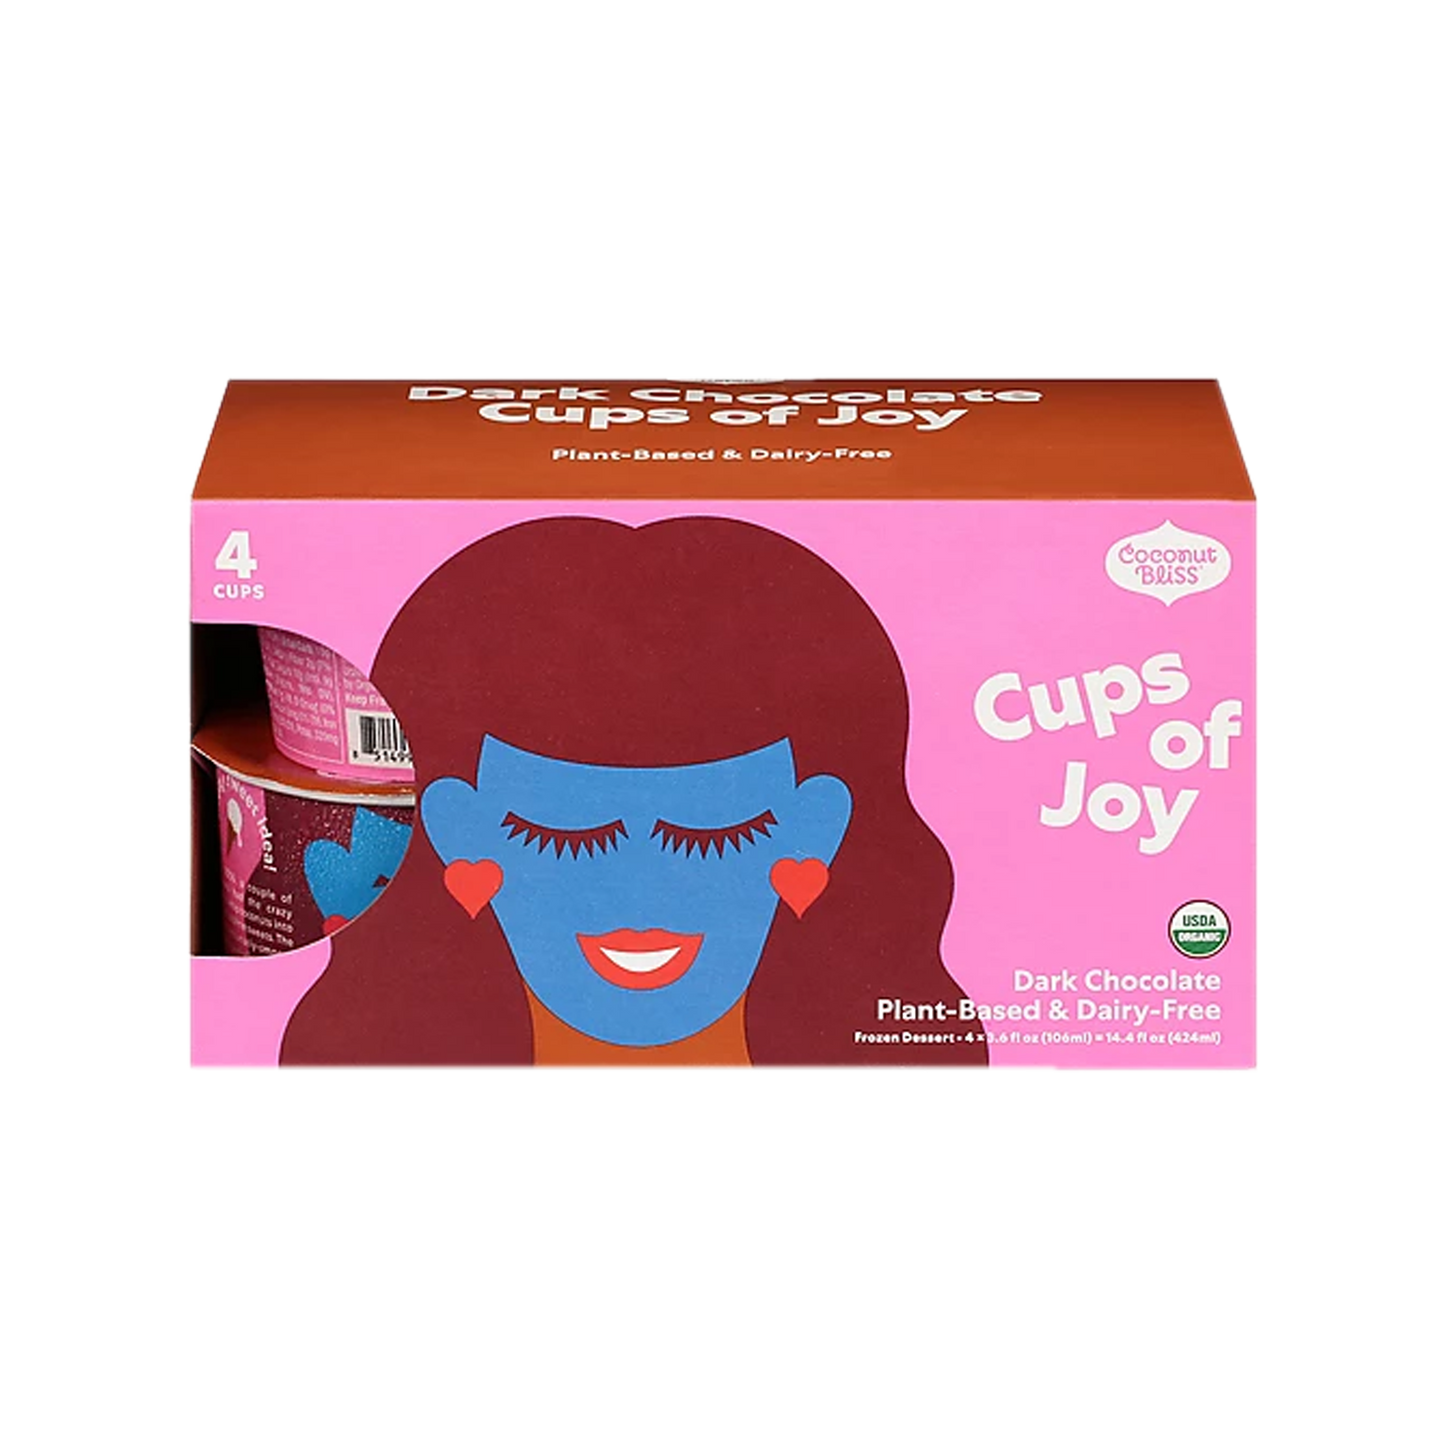 Coconut Bliss - Cups Of Joy - Dark Chocolate (4 cups) - Store Pick-Up Only